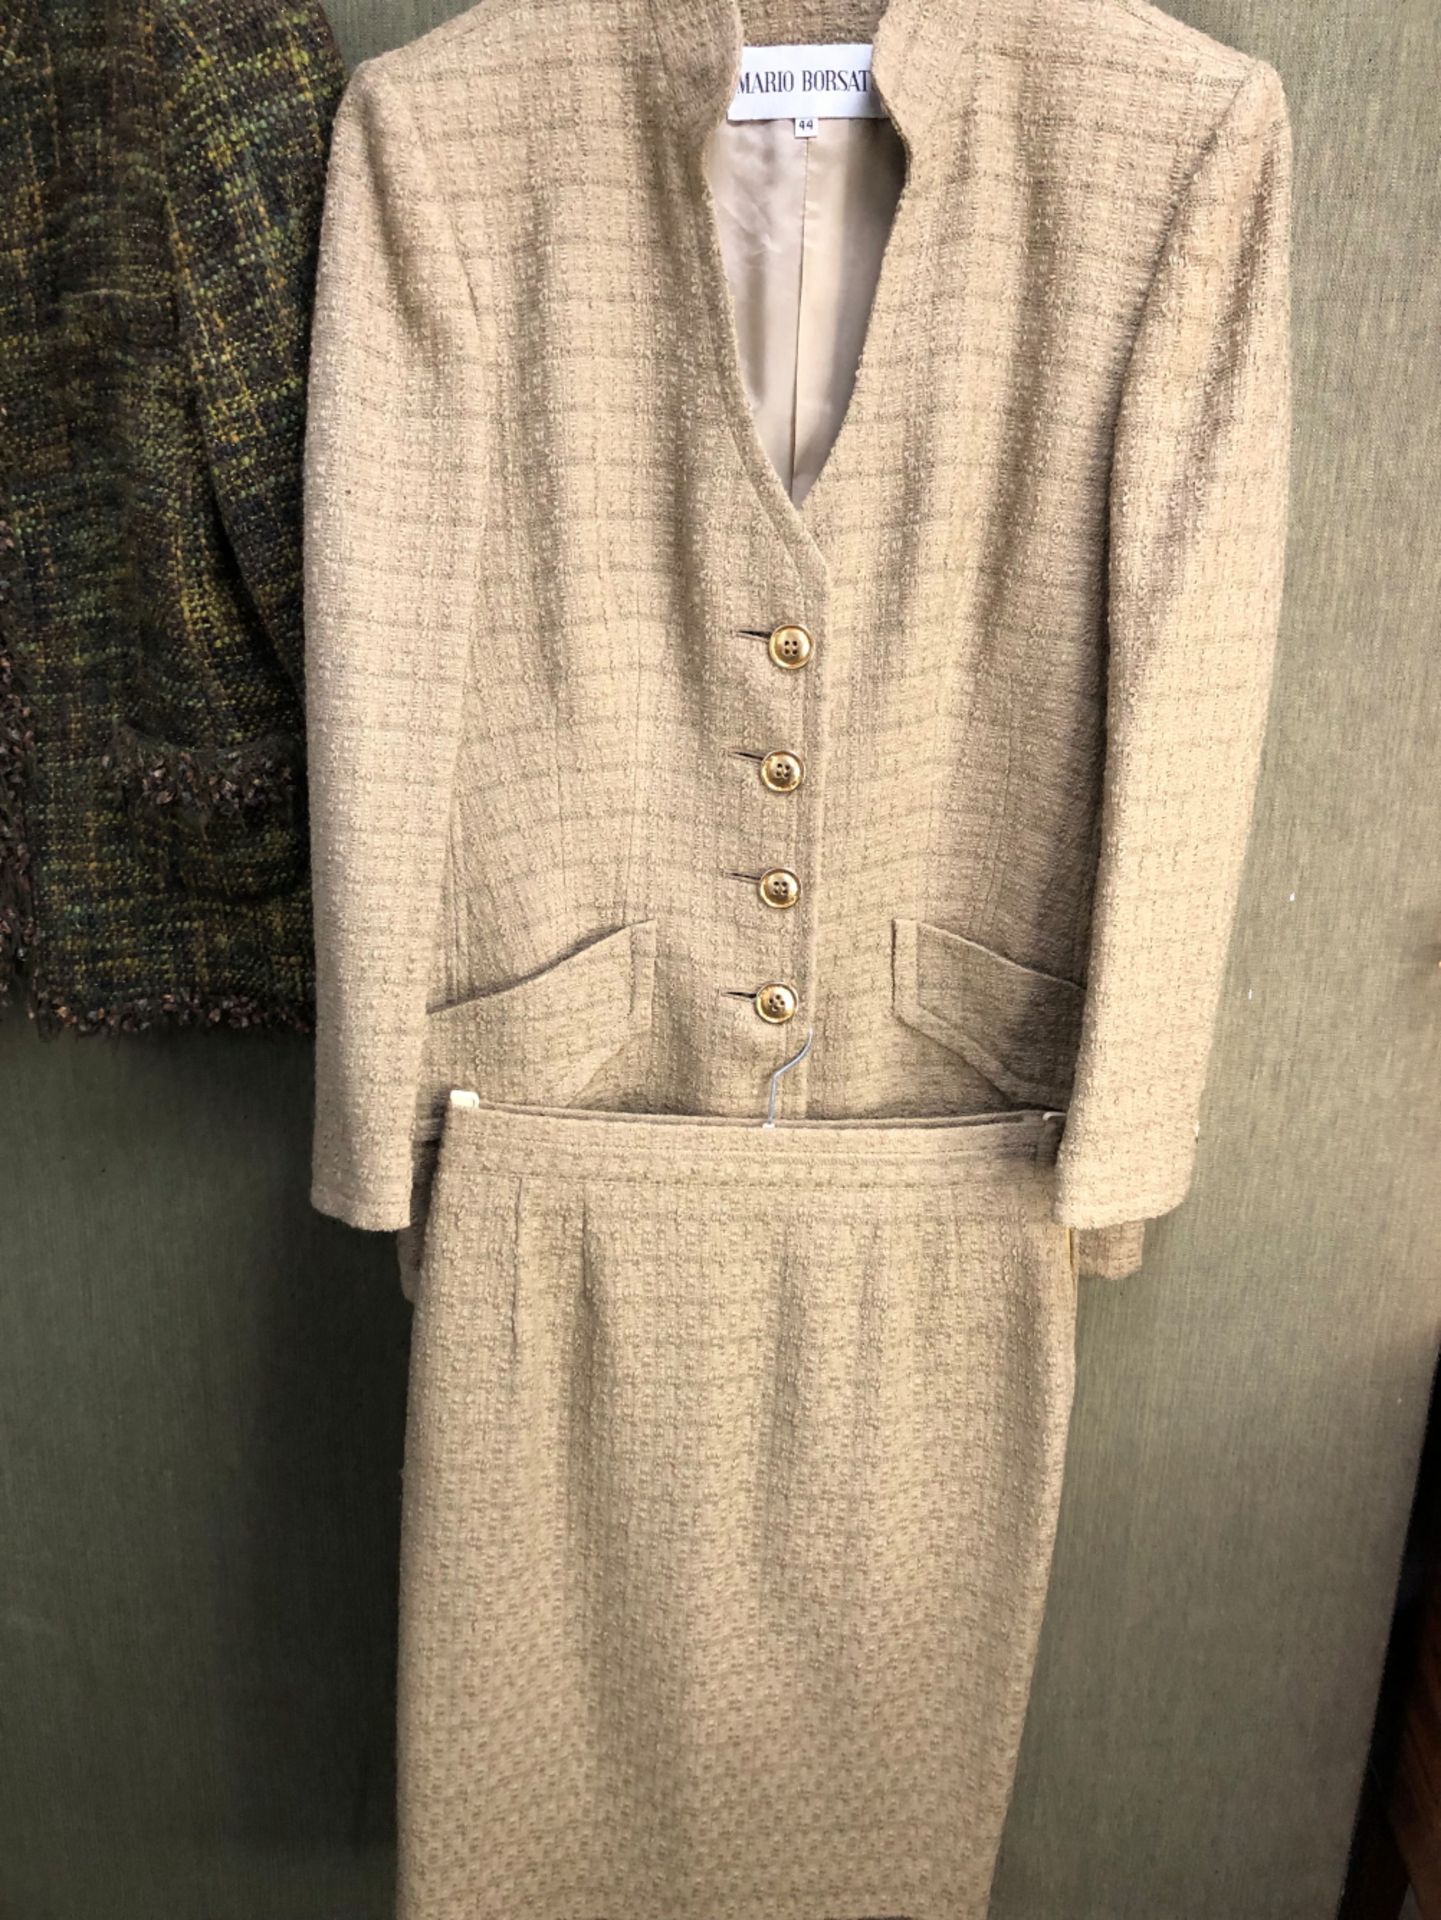 A OLIVE GREEN WOOL BLEND LADIES JACKET SIZE 44 AND MATCHING SKIRT ALSO SIZE 44, TOGETHER WITH A - Image 5 of 9